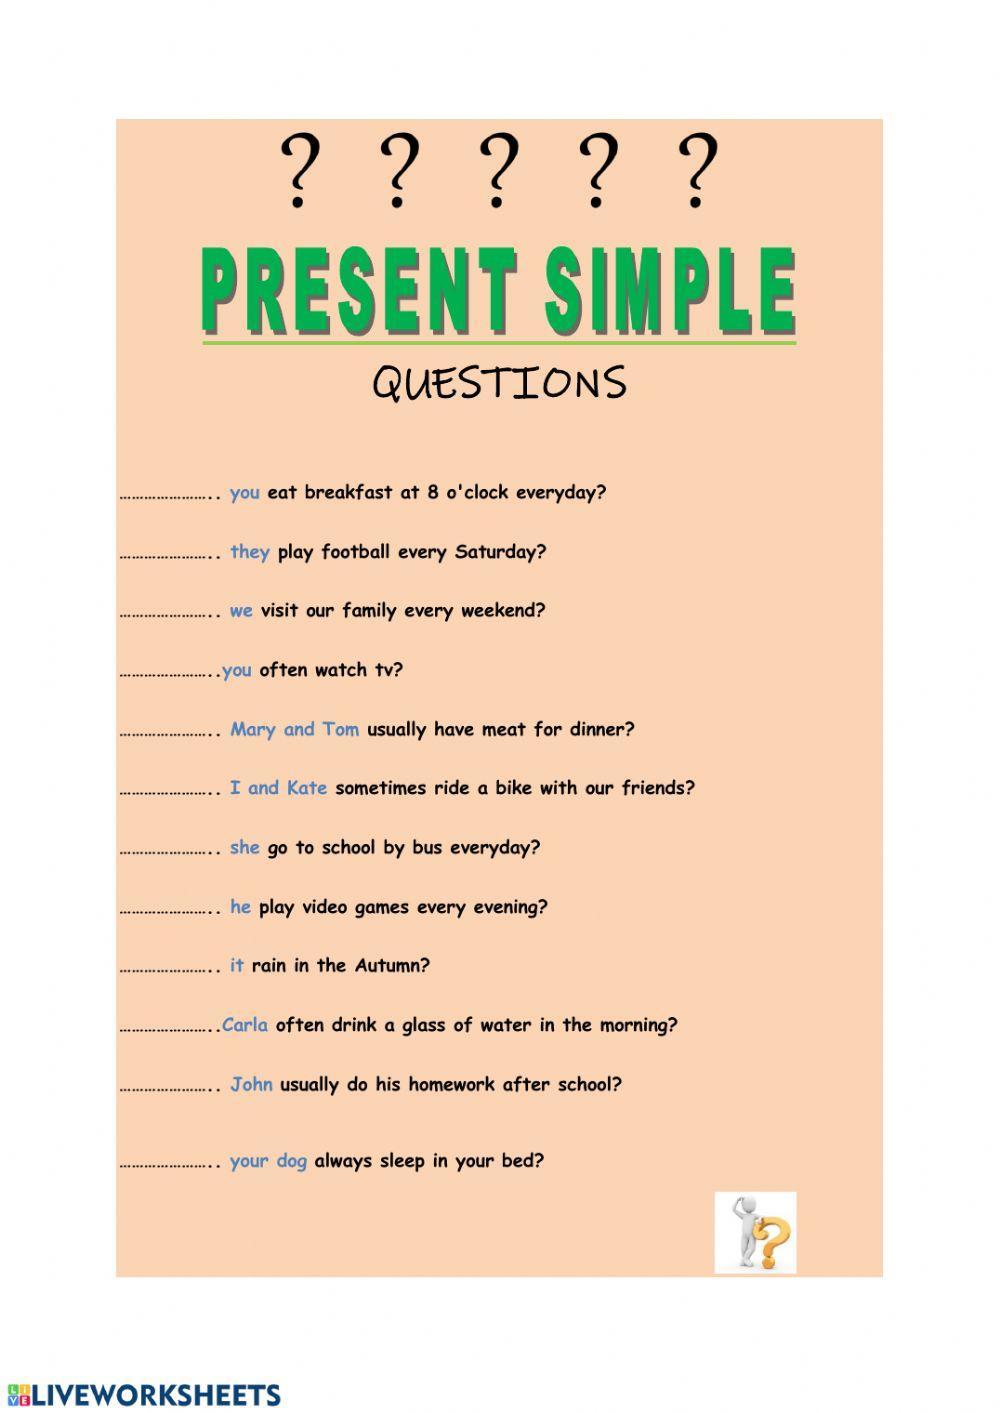 Present Simple - Questions